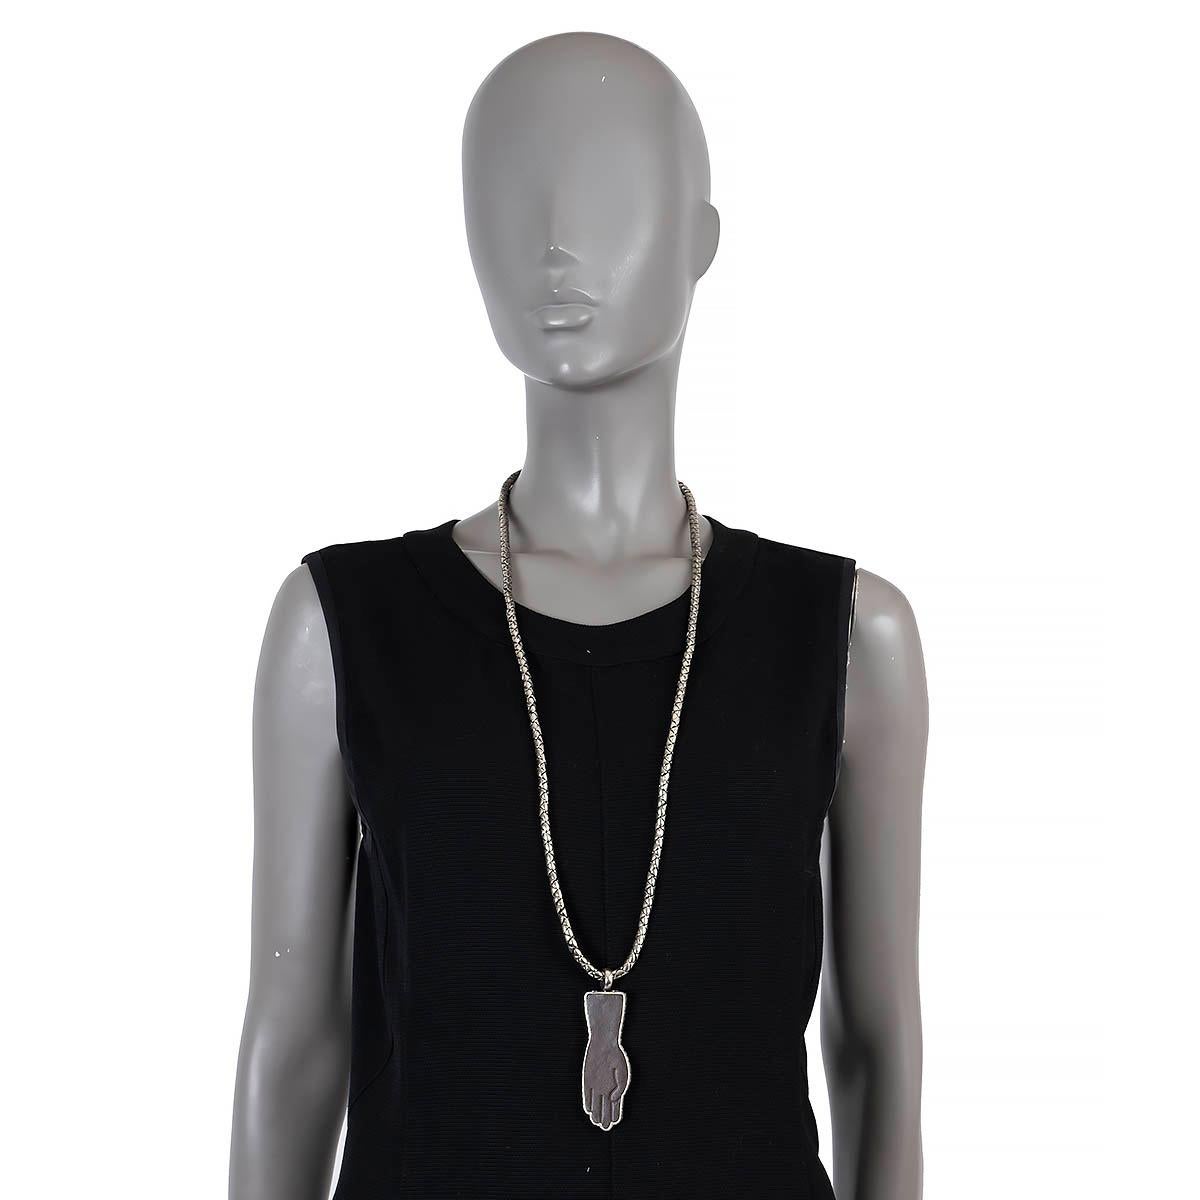 100% authentic Bottega Veneta Intrecciato necklace in antiqued sterling silver. Hand woven chain with dark brown leather inset hand pedant. Has been worn and is in excellent condition. 

Measurements
Width	2.5cm (1in)
Length	89cm